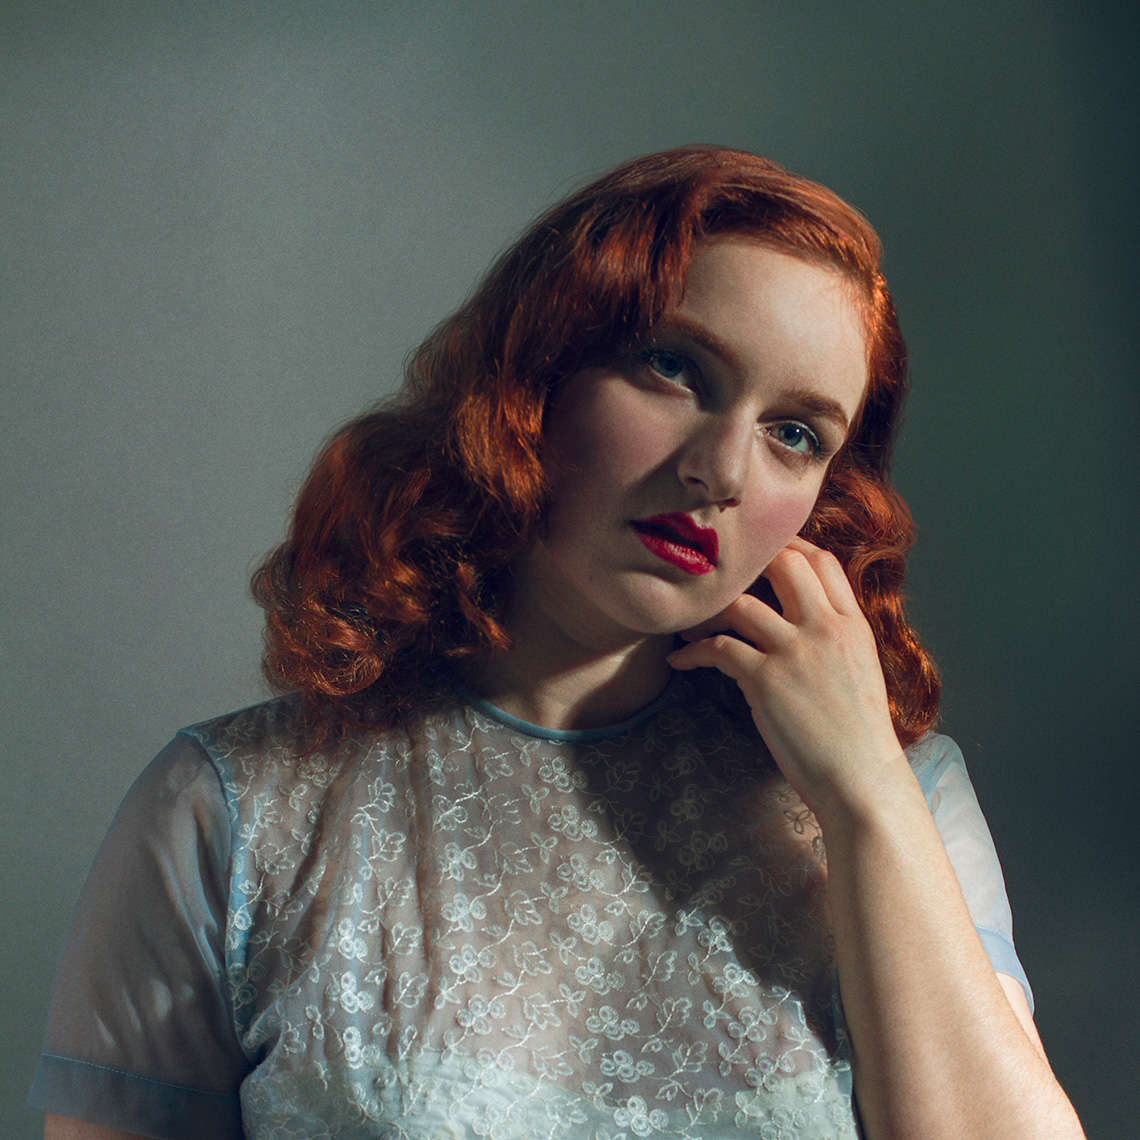 Retro-styled head & shoulders beauty portrait of a pretty, fair, blue-eyed young woman with shoulder-length wavy red hair, bright red lipstick, and a sheer light blue silk short-sleeved blouse.